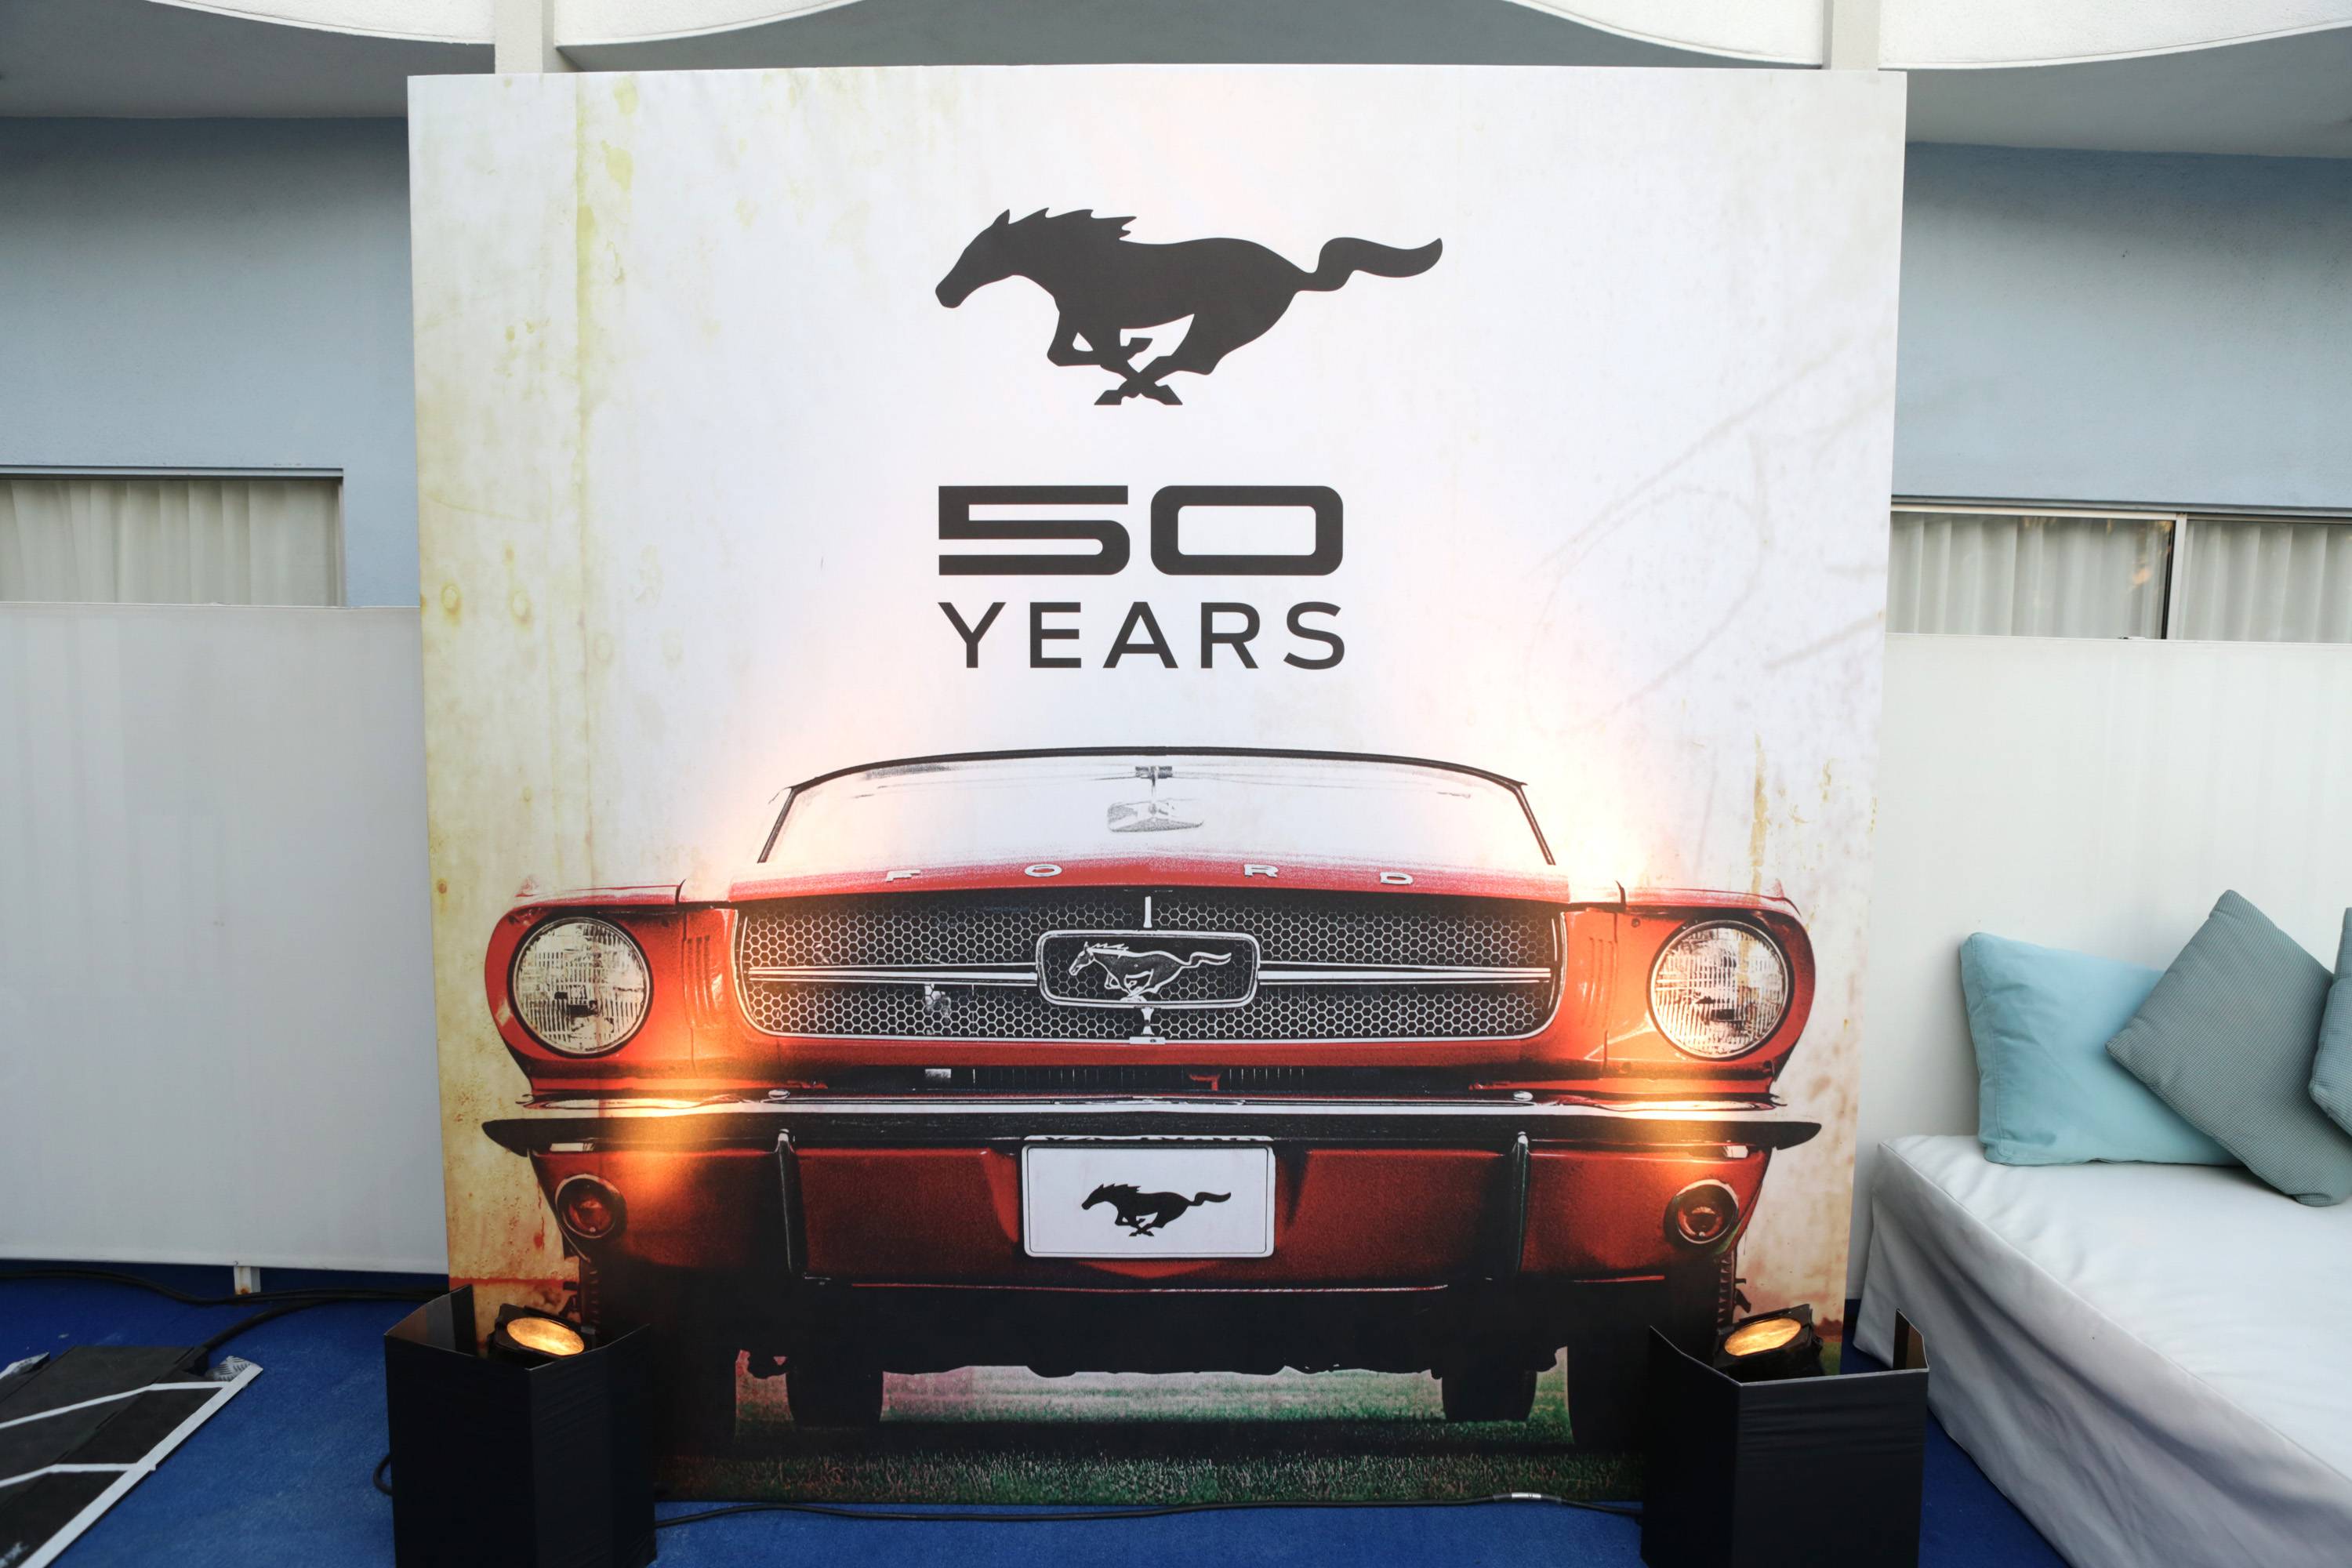 Ford Motor Company And Decades LA Explore Five Decades Of The Mustang, Music And Iconic Fashion